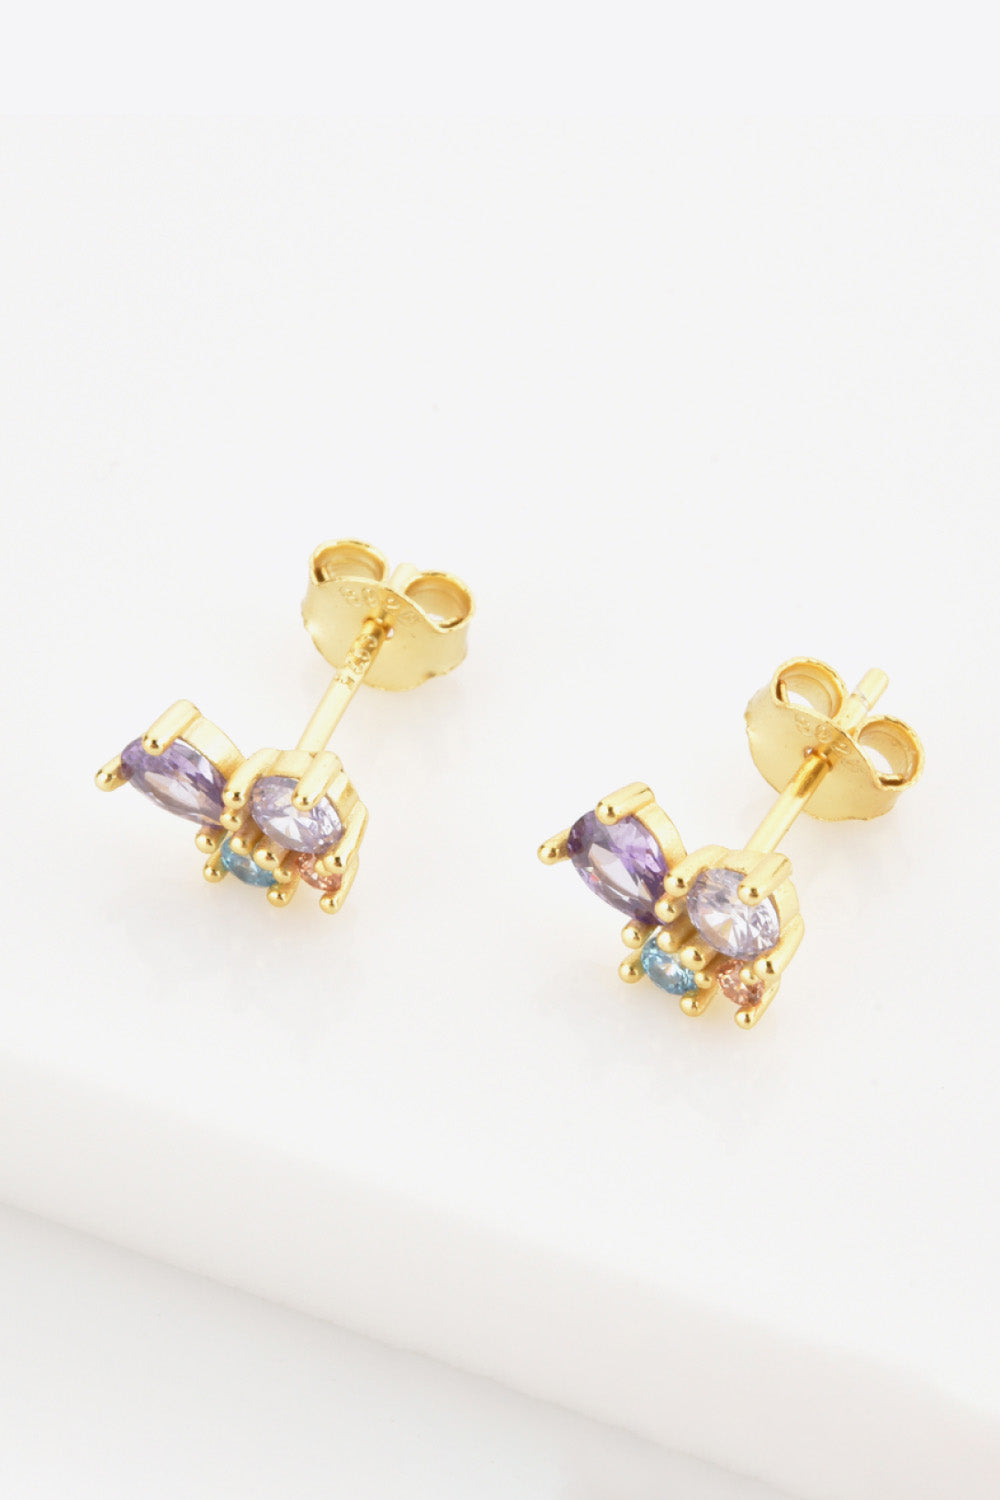 - Multicolored Zircon 925 Sterling Silver Gold Plated Stud Earrings - 2 colors - earrings at TFC&H Co.